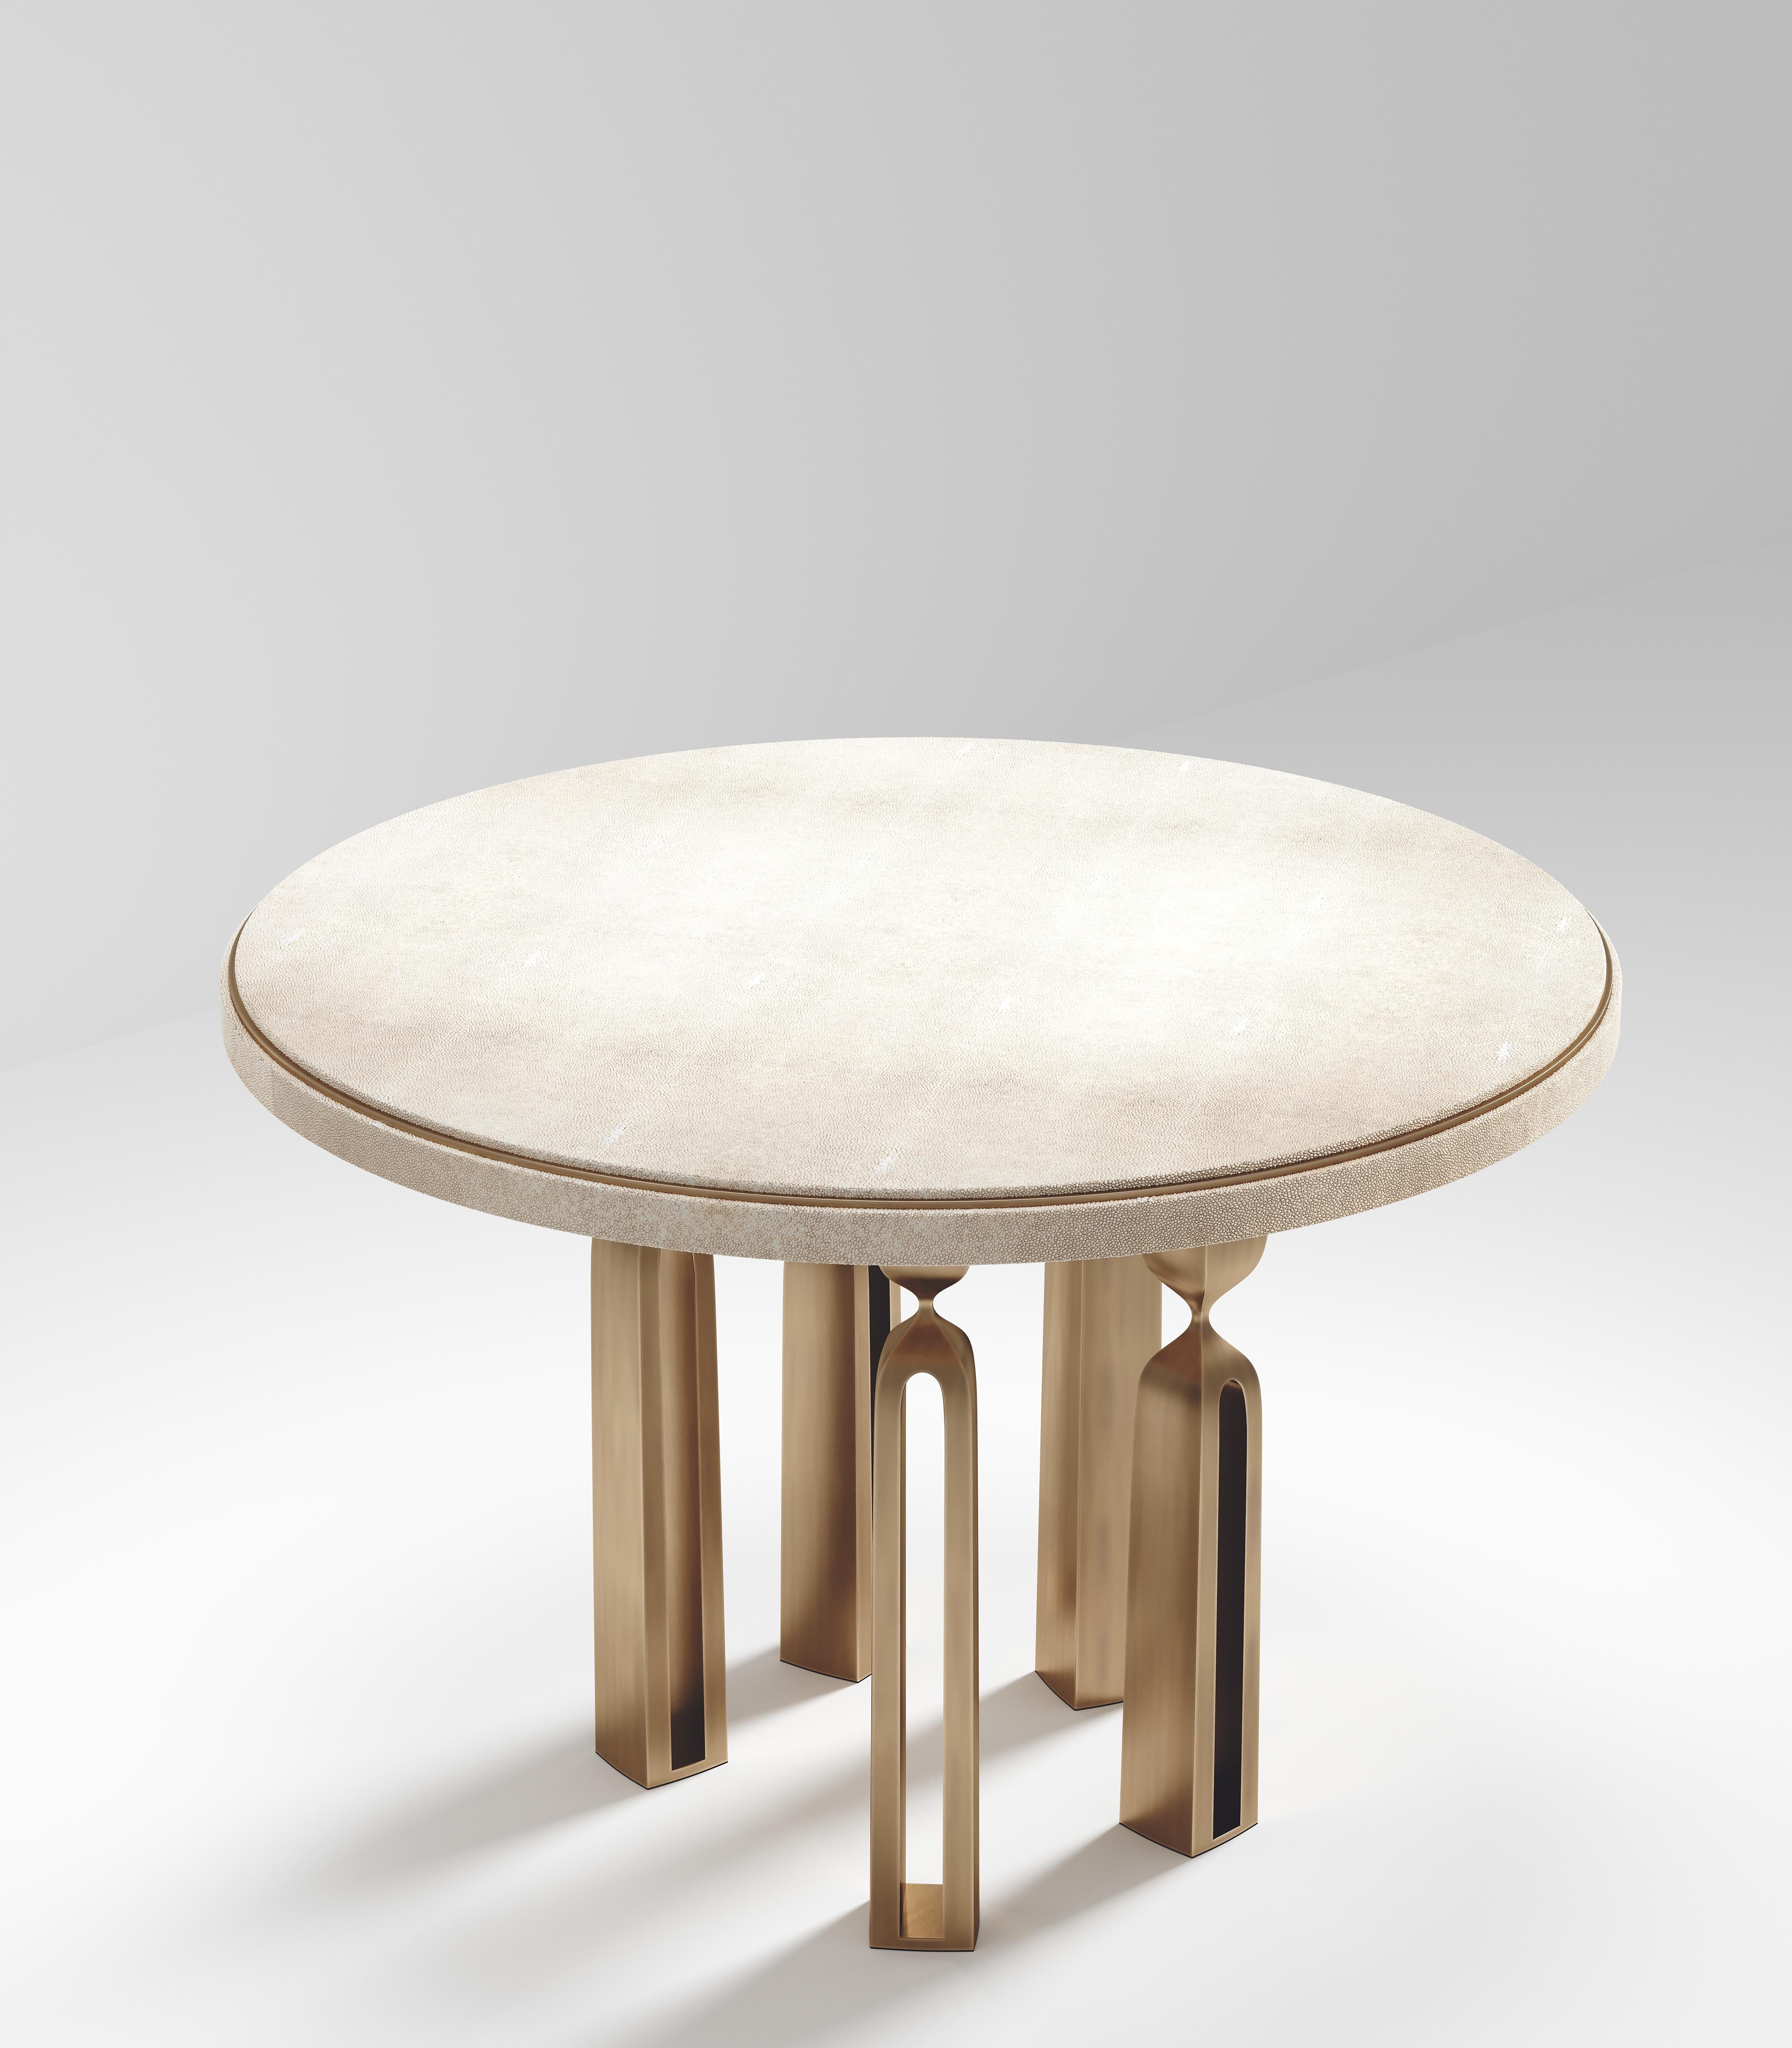 Inspired by the original Rhapsody lamp, by her fiancée Patrick Coard Paris, Kifu Paris designs a sculptural breakfast table as an ode to his iconic lighting collection. The tabletop is inlaid in cream shagreen and sits on a cluster of 4